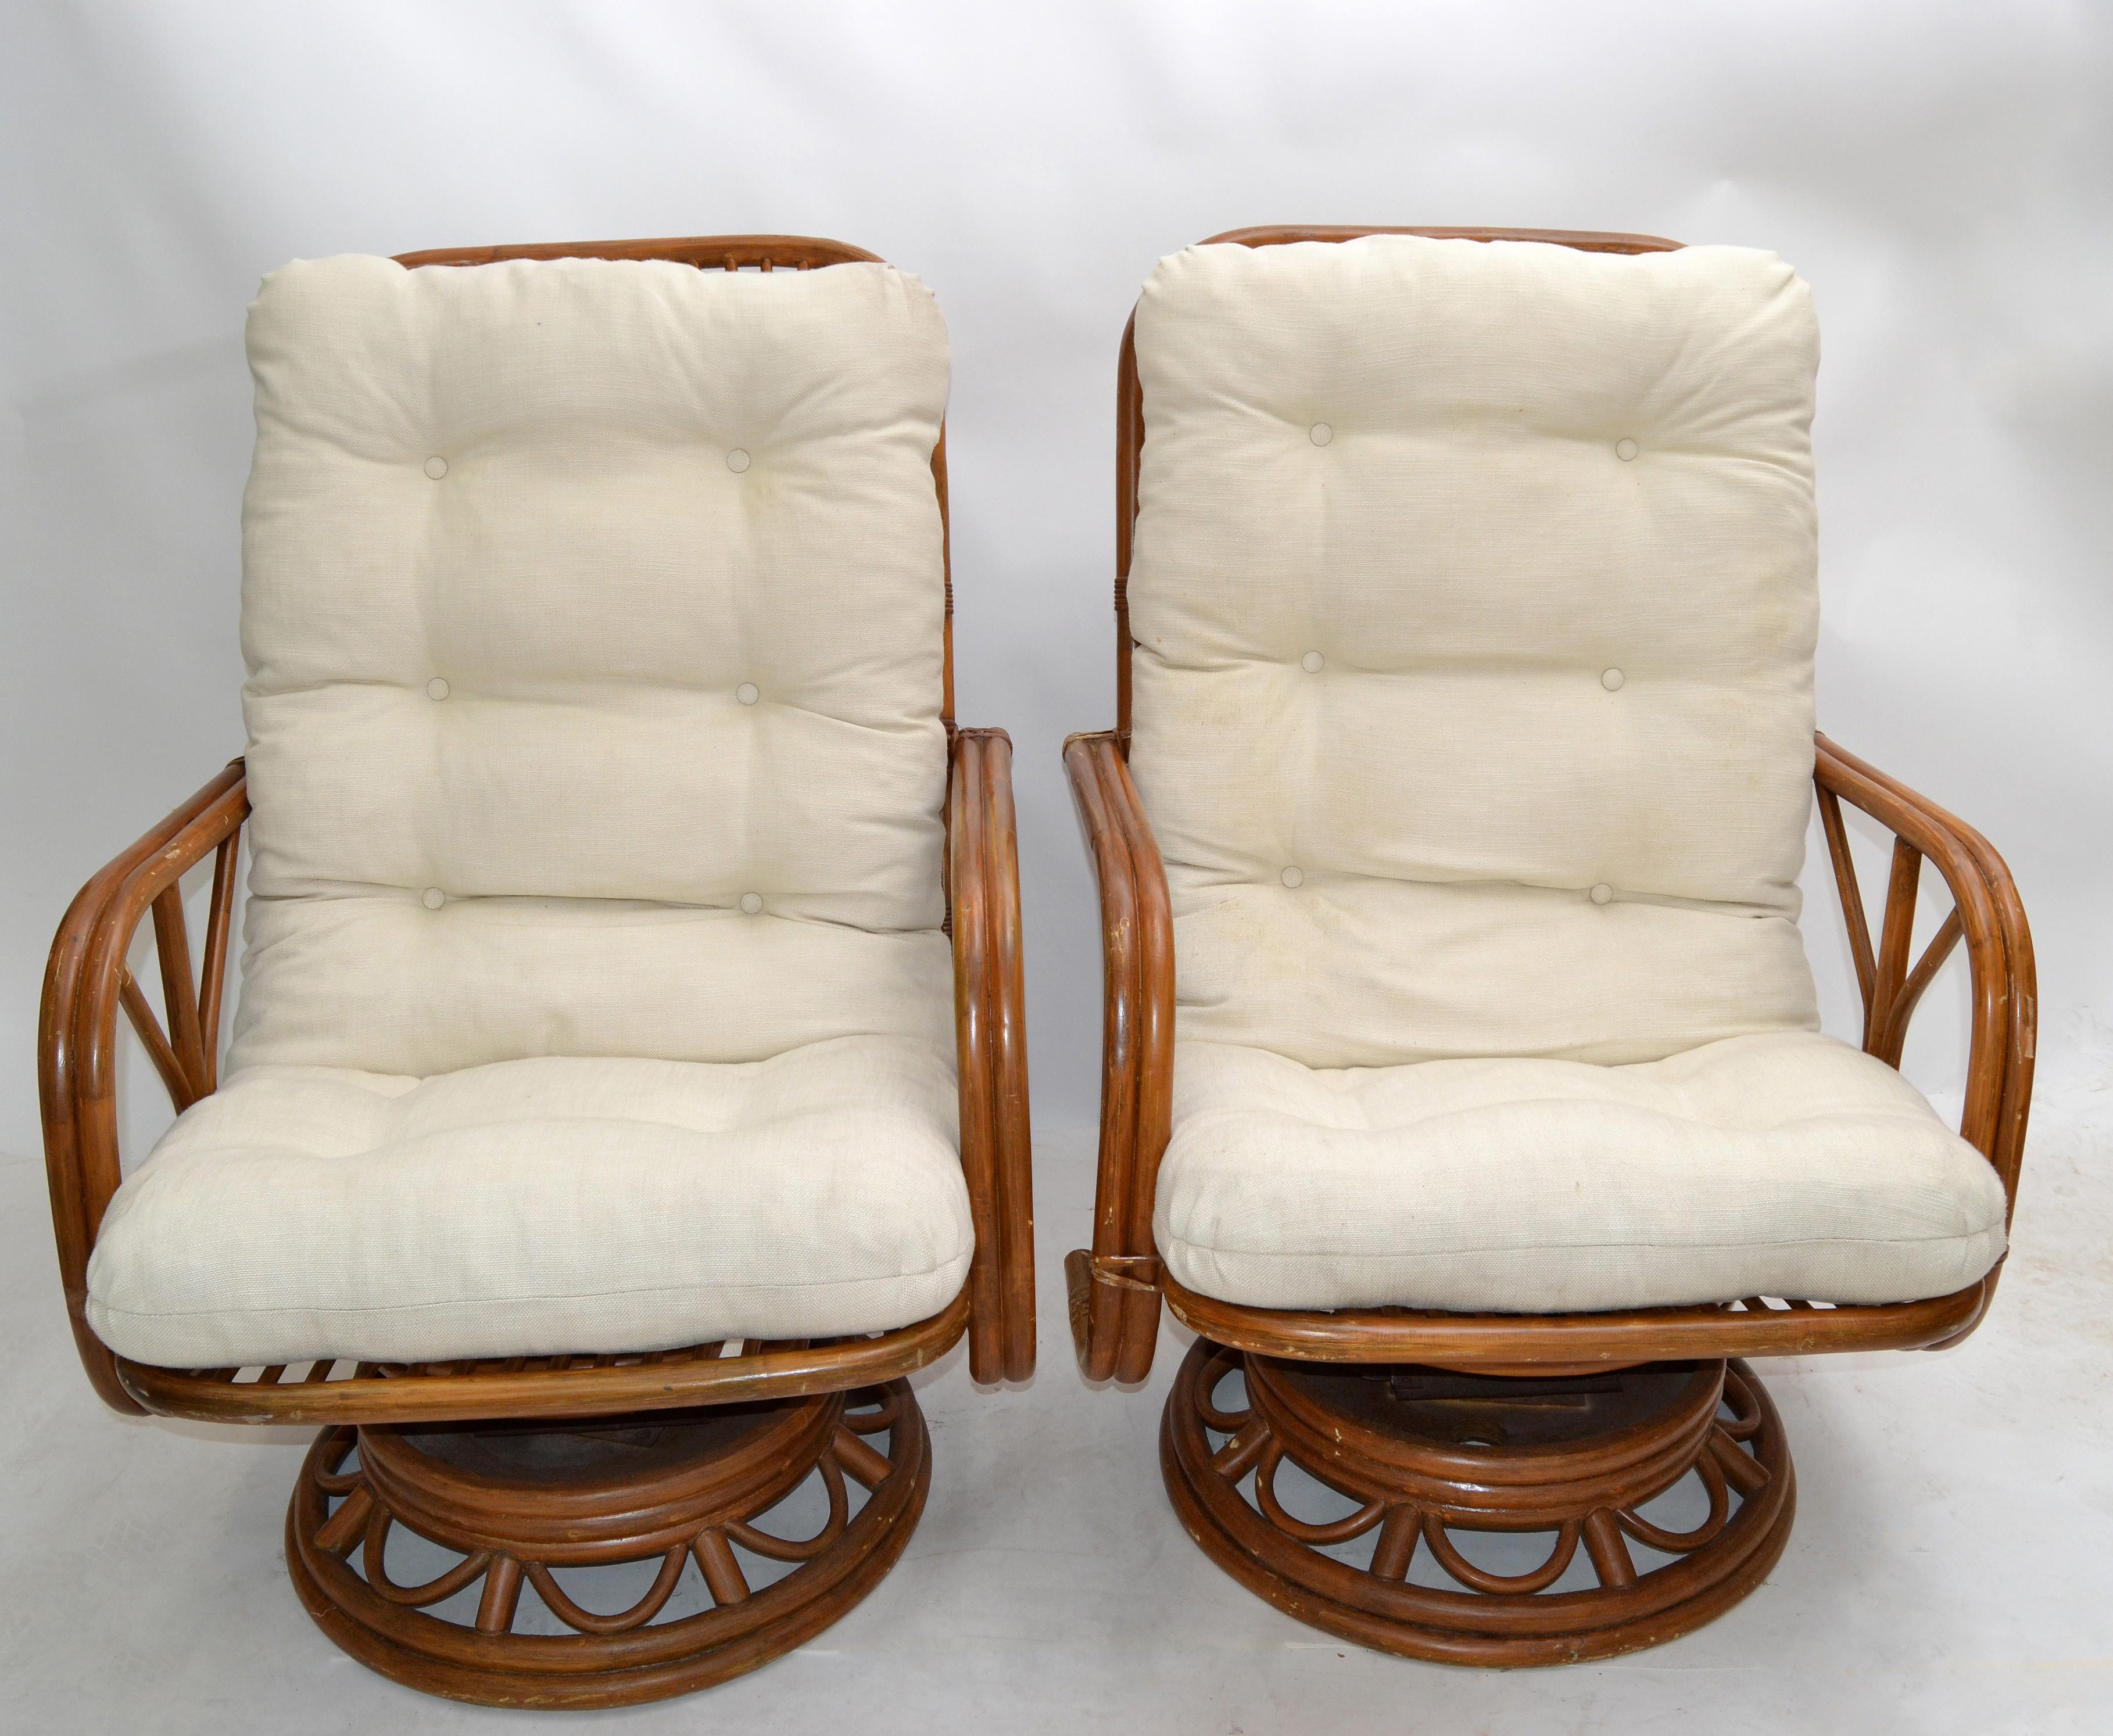 Vintage Bamboo & Wicker High Back Lounge Chair Beige Linen Upholstery, Pair For Sale 3